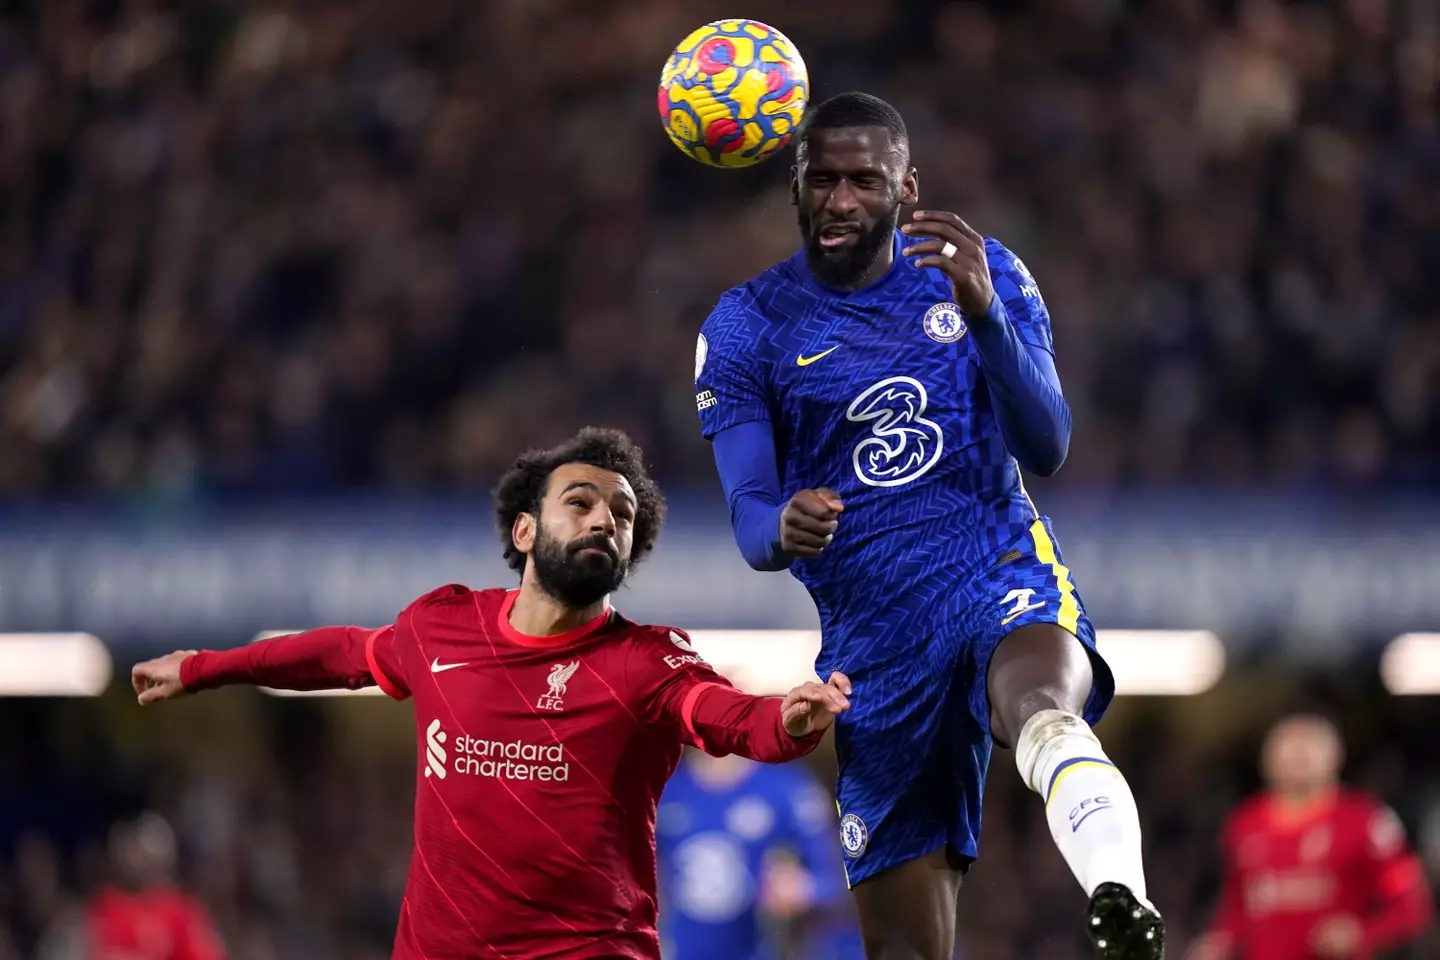 Liverpool's Mohamed Salah (left) and Chelsea's Antonio Rudiger battle for the ball during the Premier League match at Stamford Bridge. (Alamy)